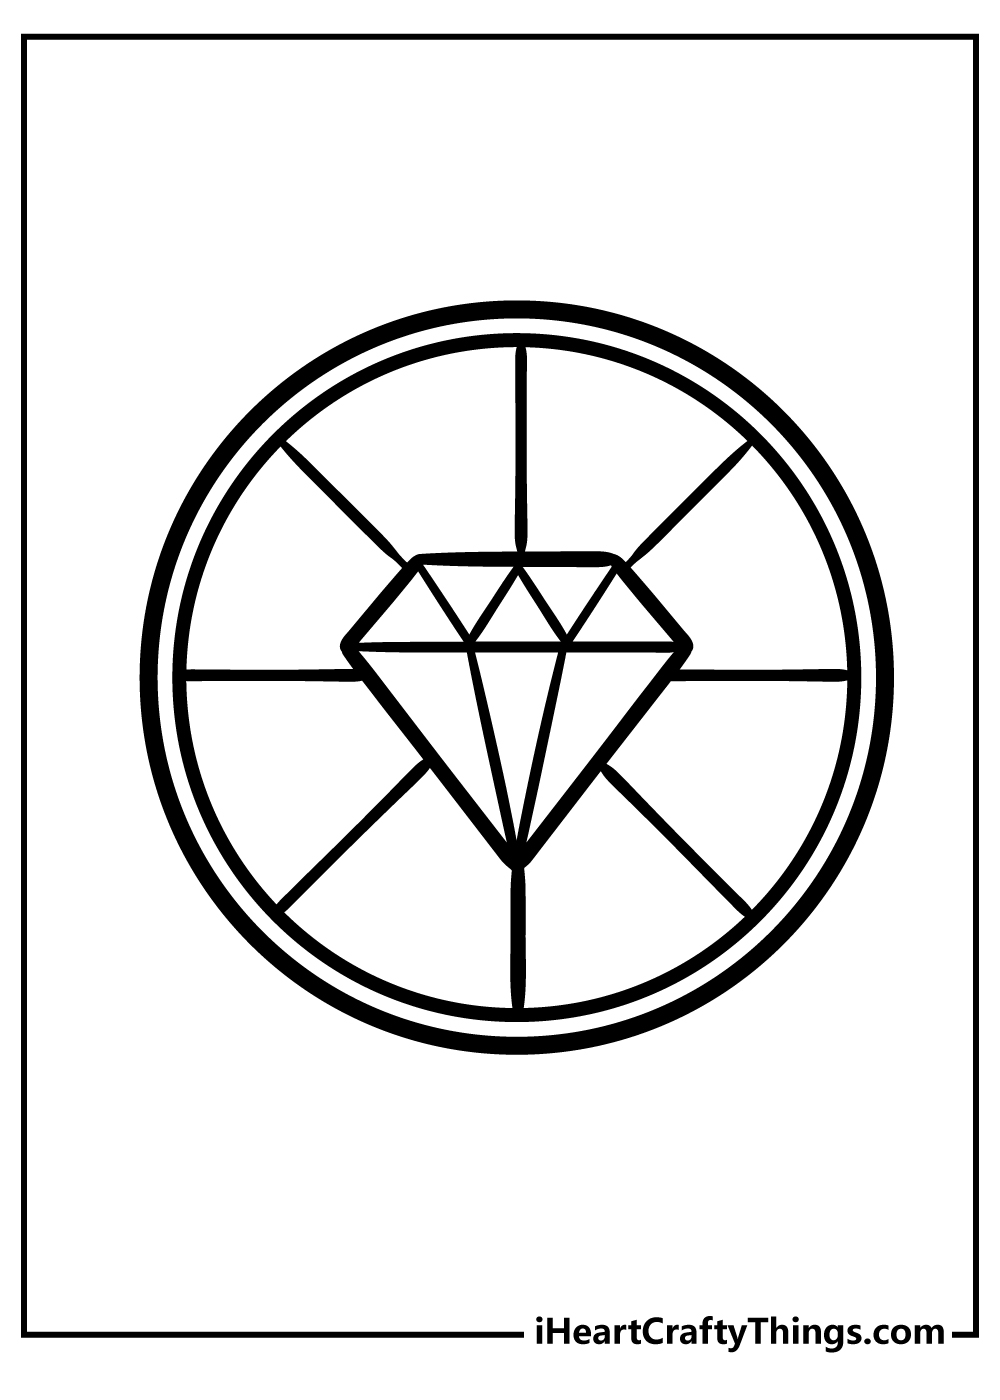 Stained Glass Coloring Pages for kids free download